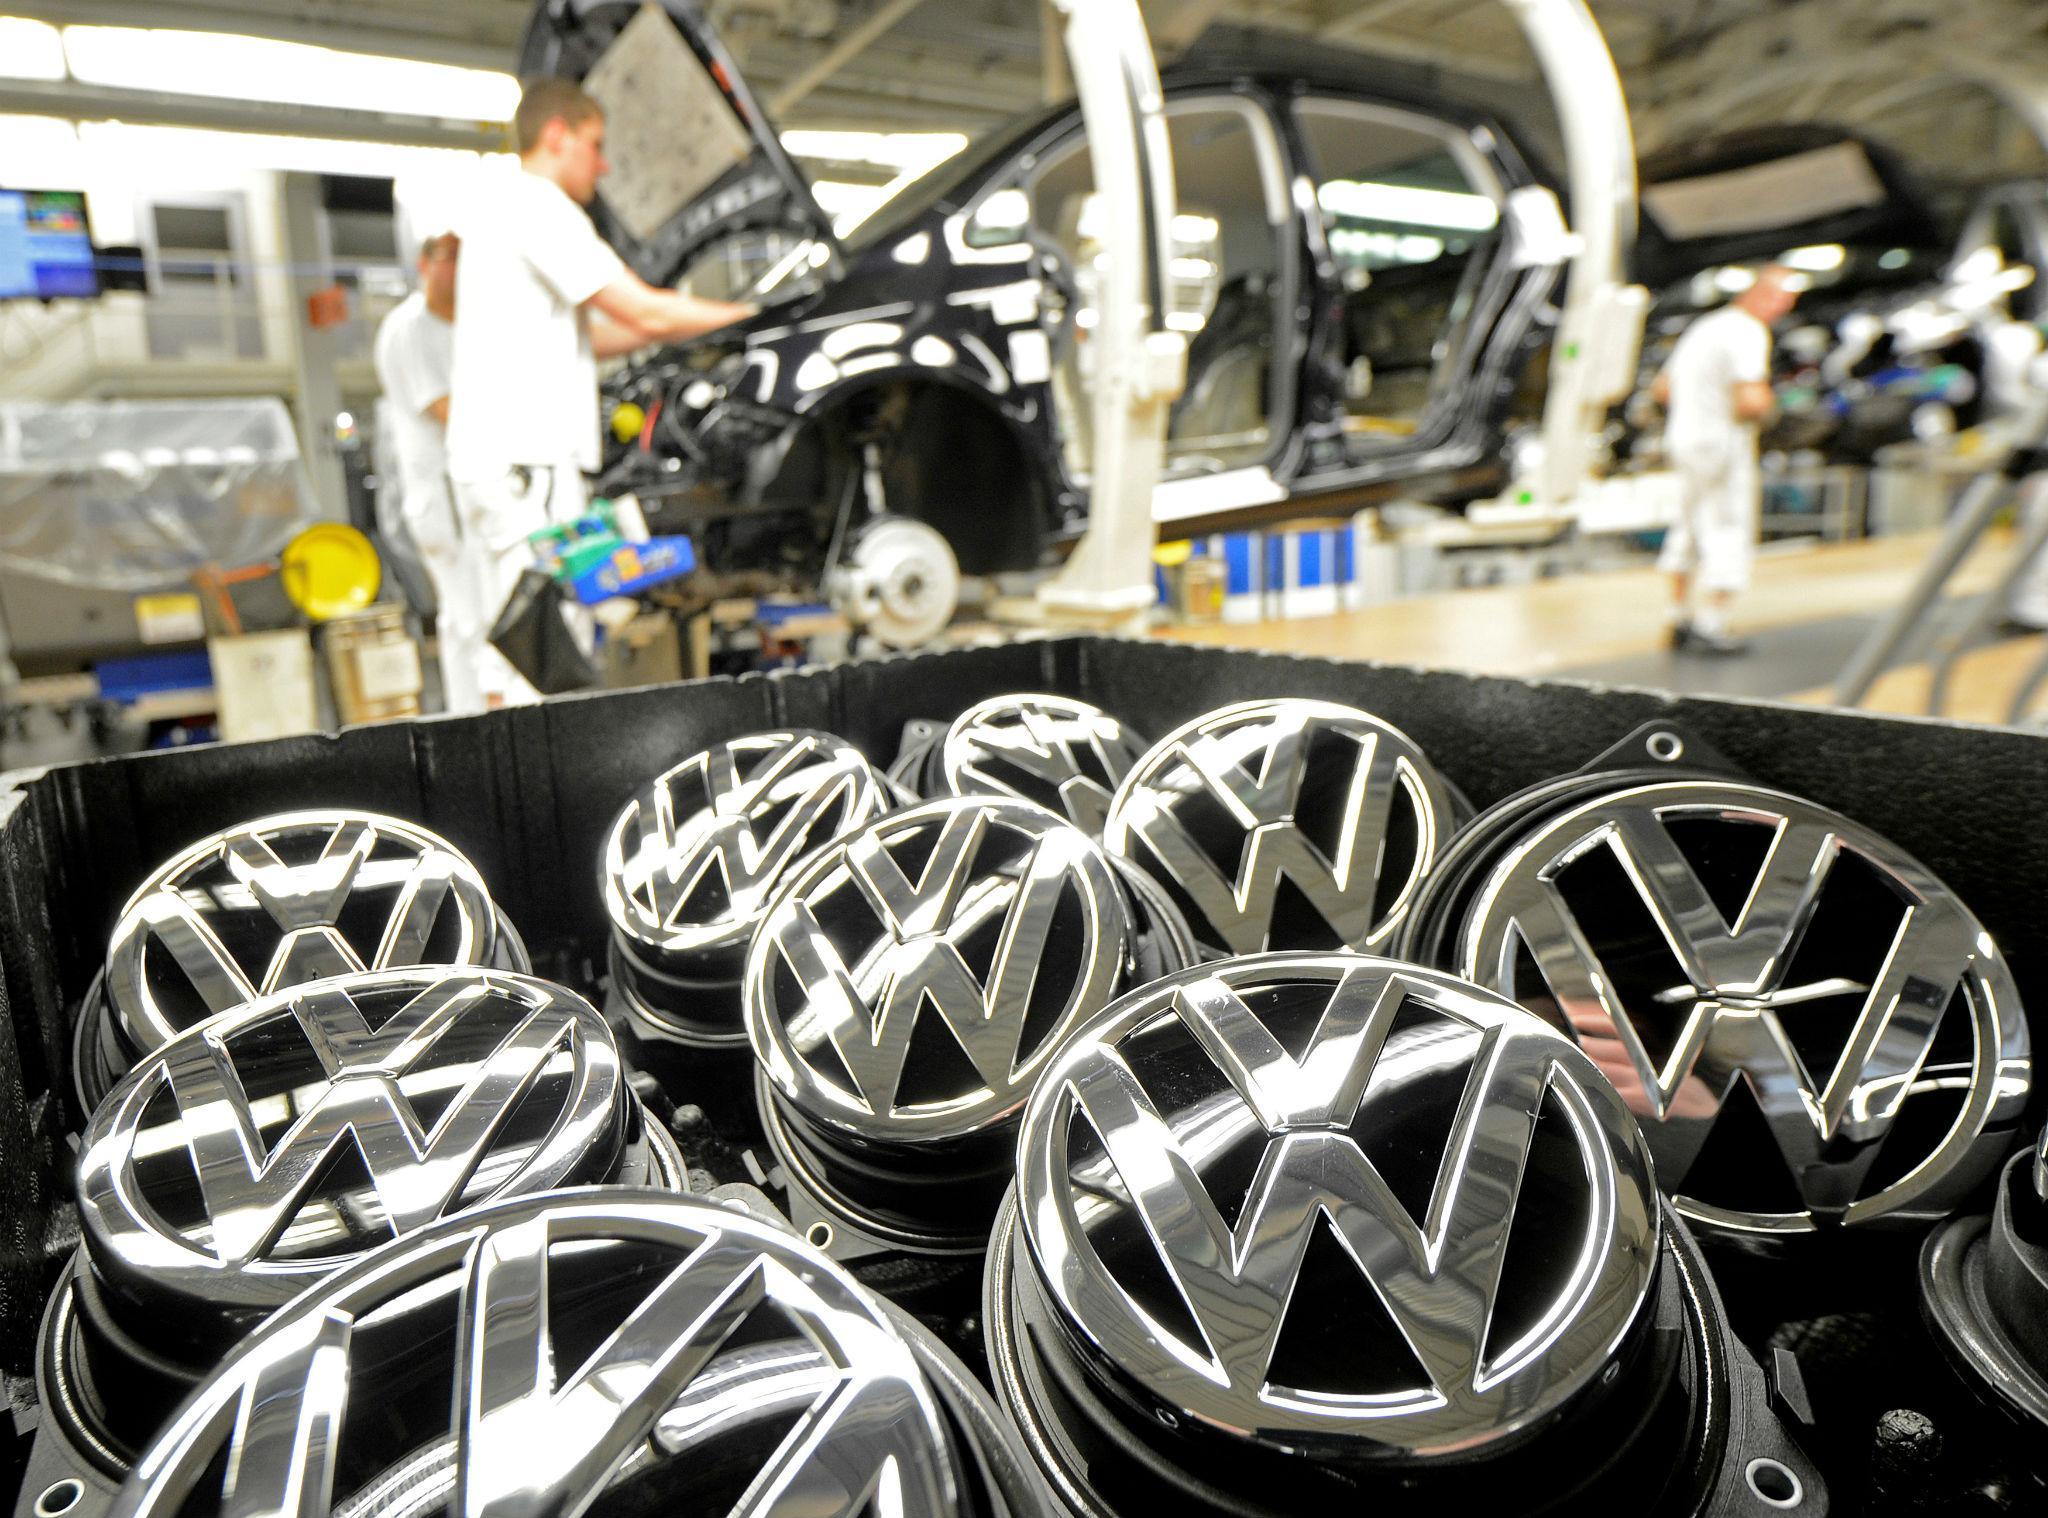 Volkswagen, which has been hit with a $15 billion fine in the US, has said that it will challenge the Korean verdict